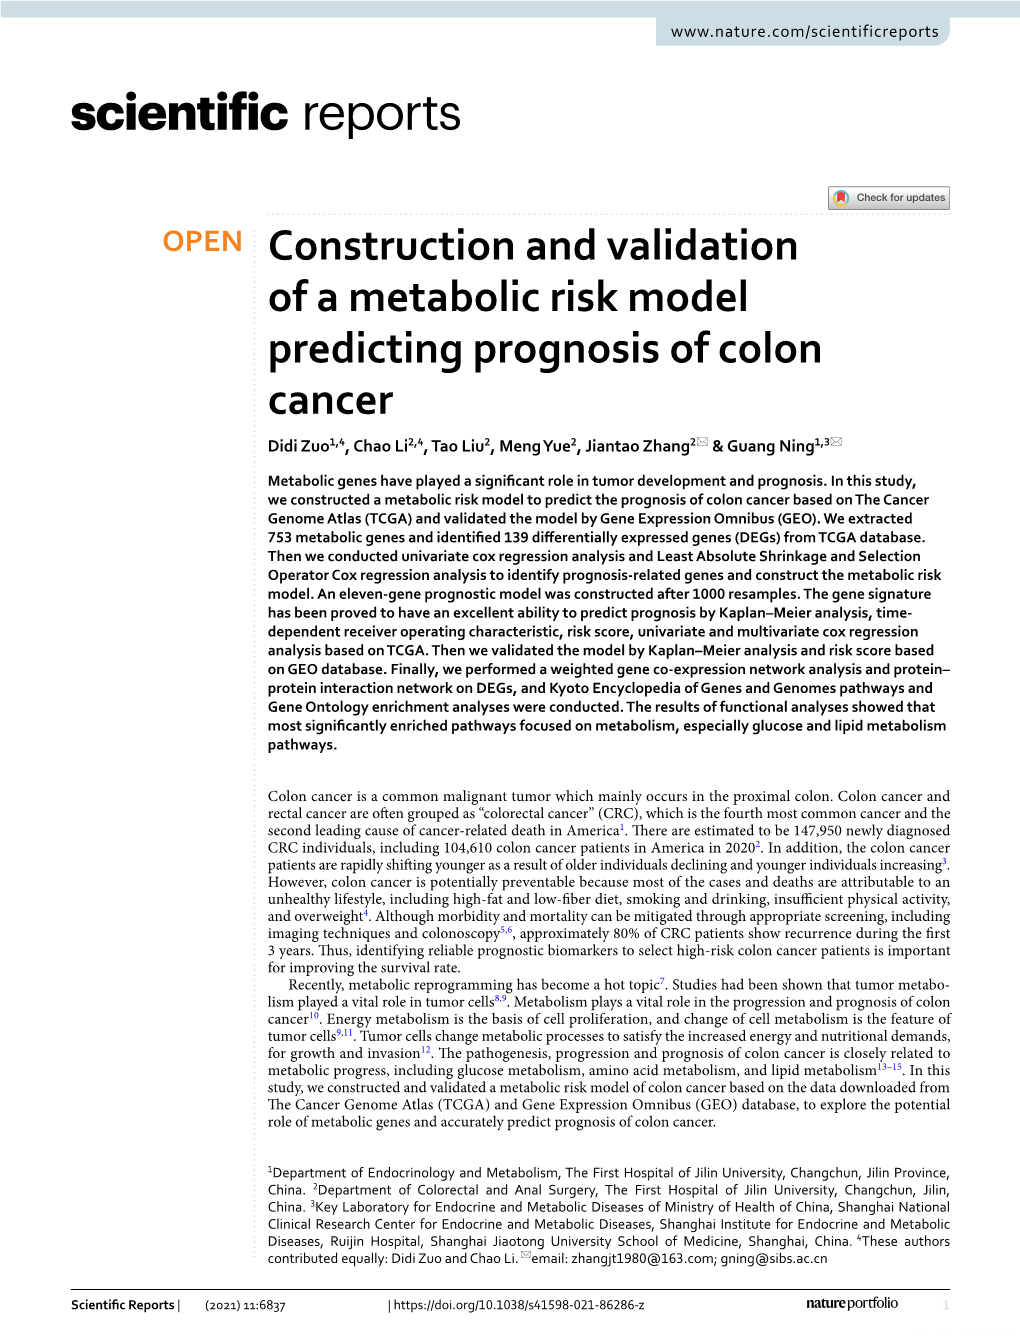 Construction and Validation of a Metabolic Risk Model Predicting